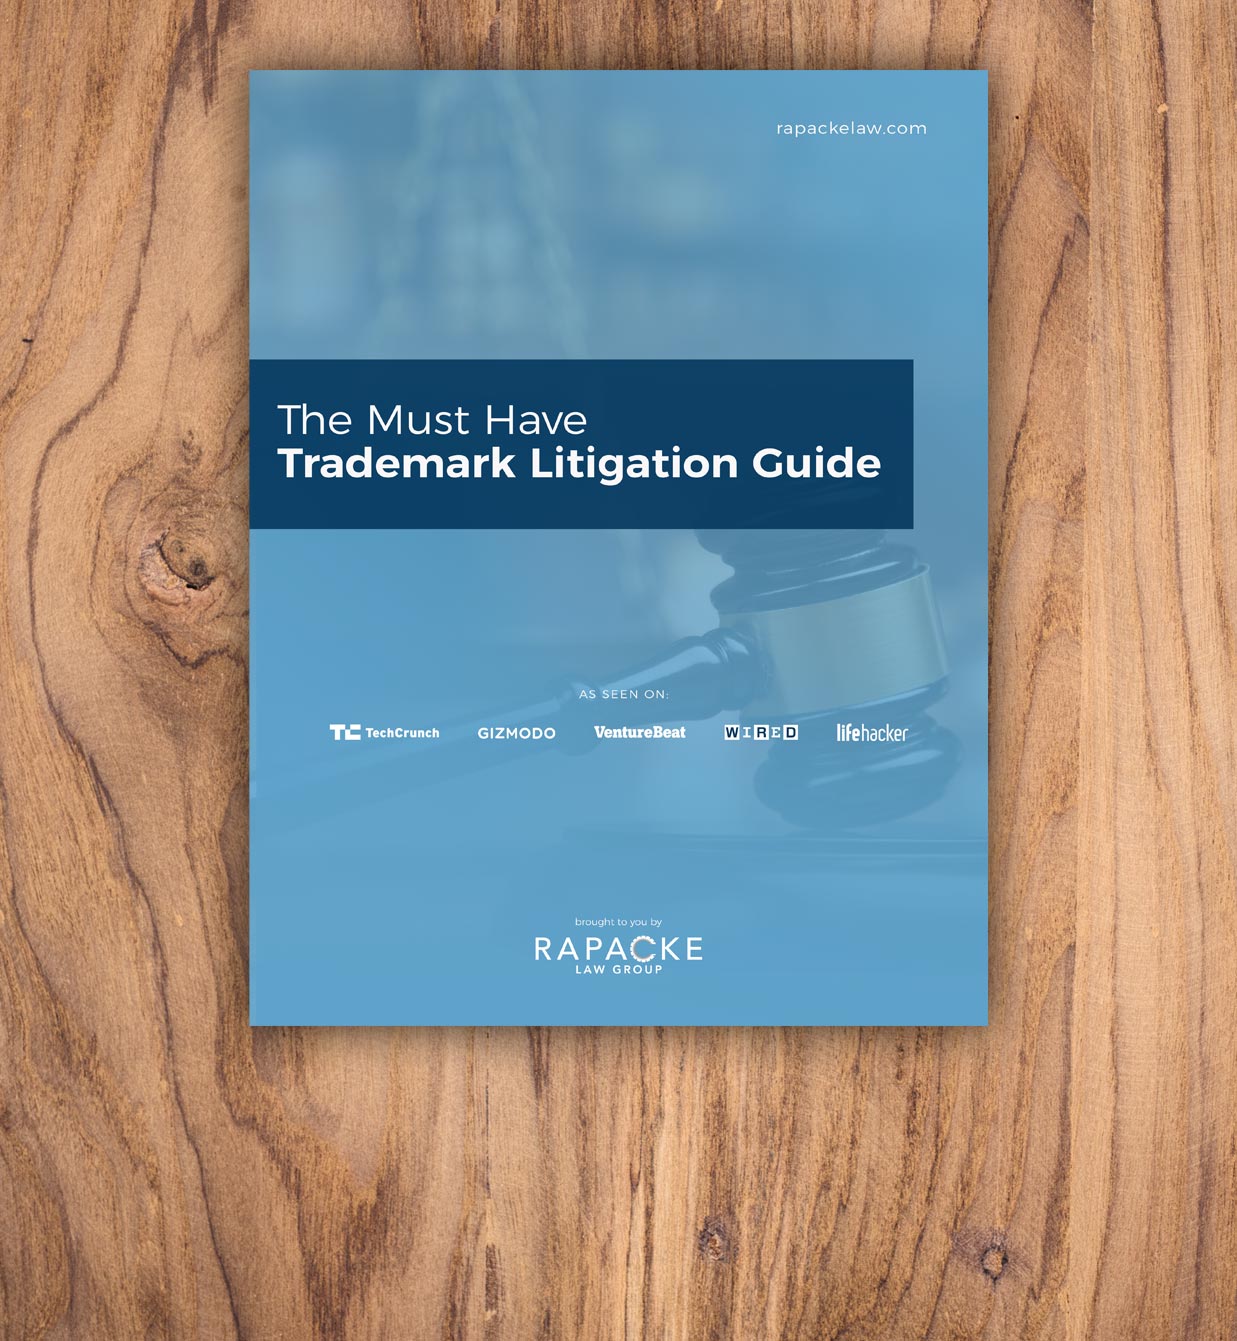 The Must Have Trademark Litigation Guide